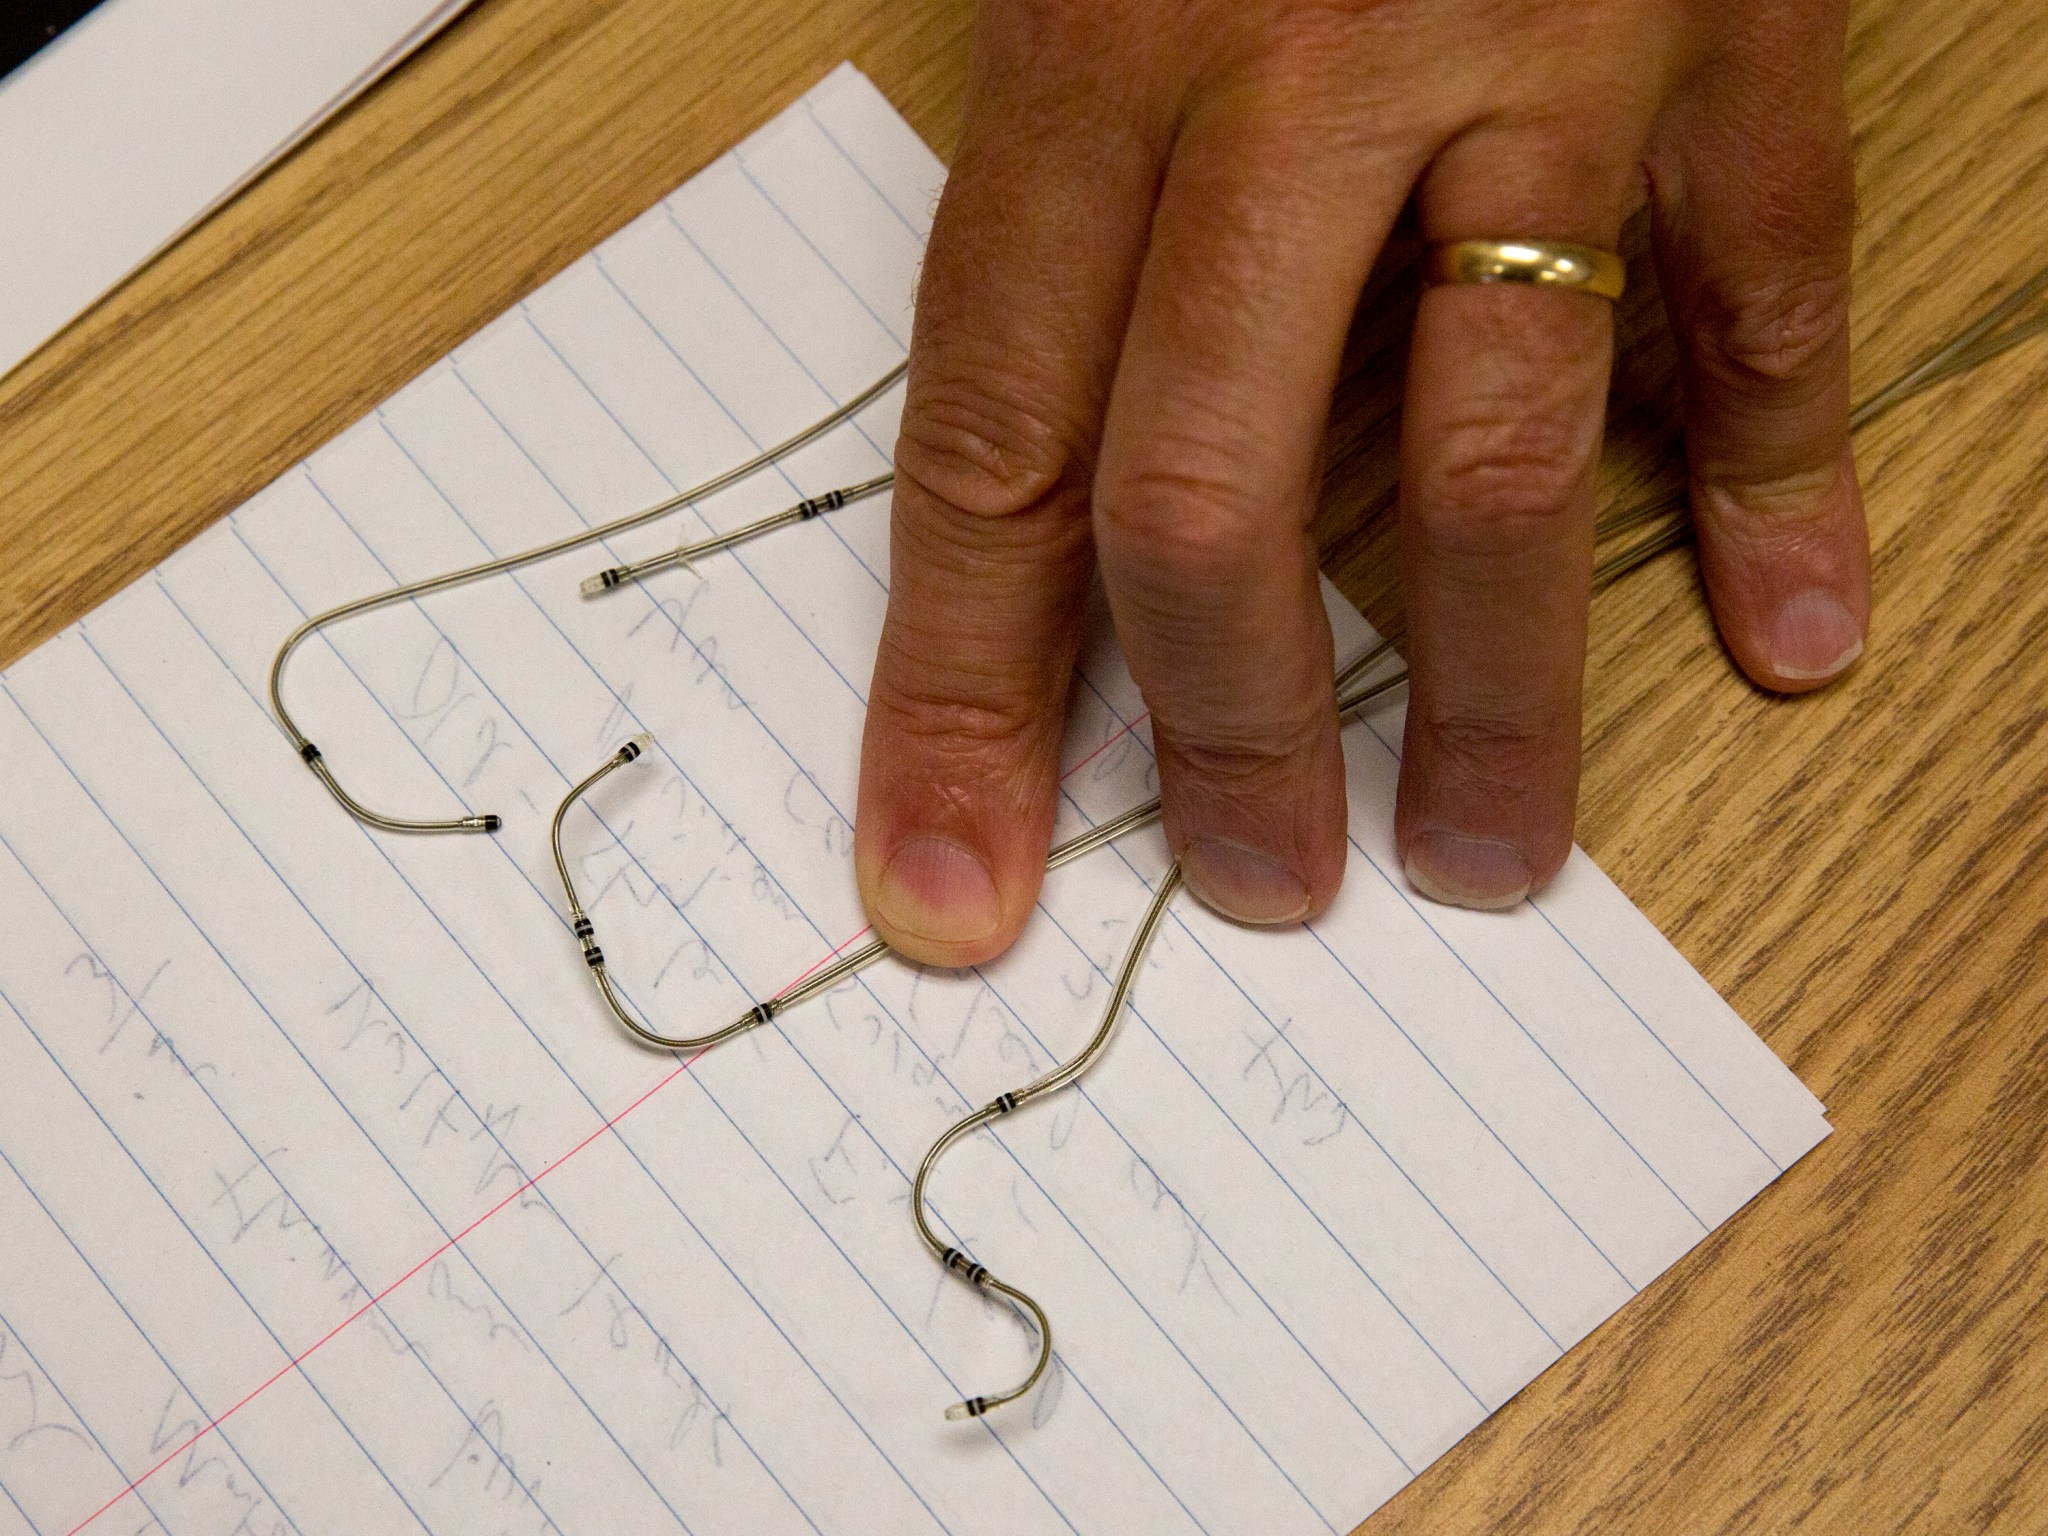 Robert Bryant displays examples of wires made with LaRC-SI.